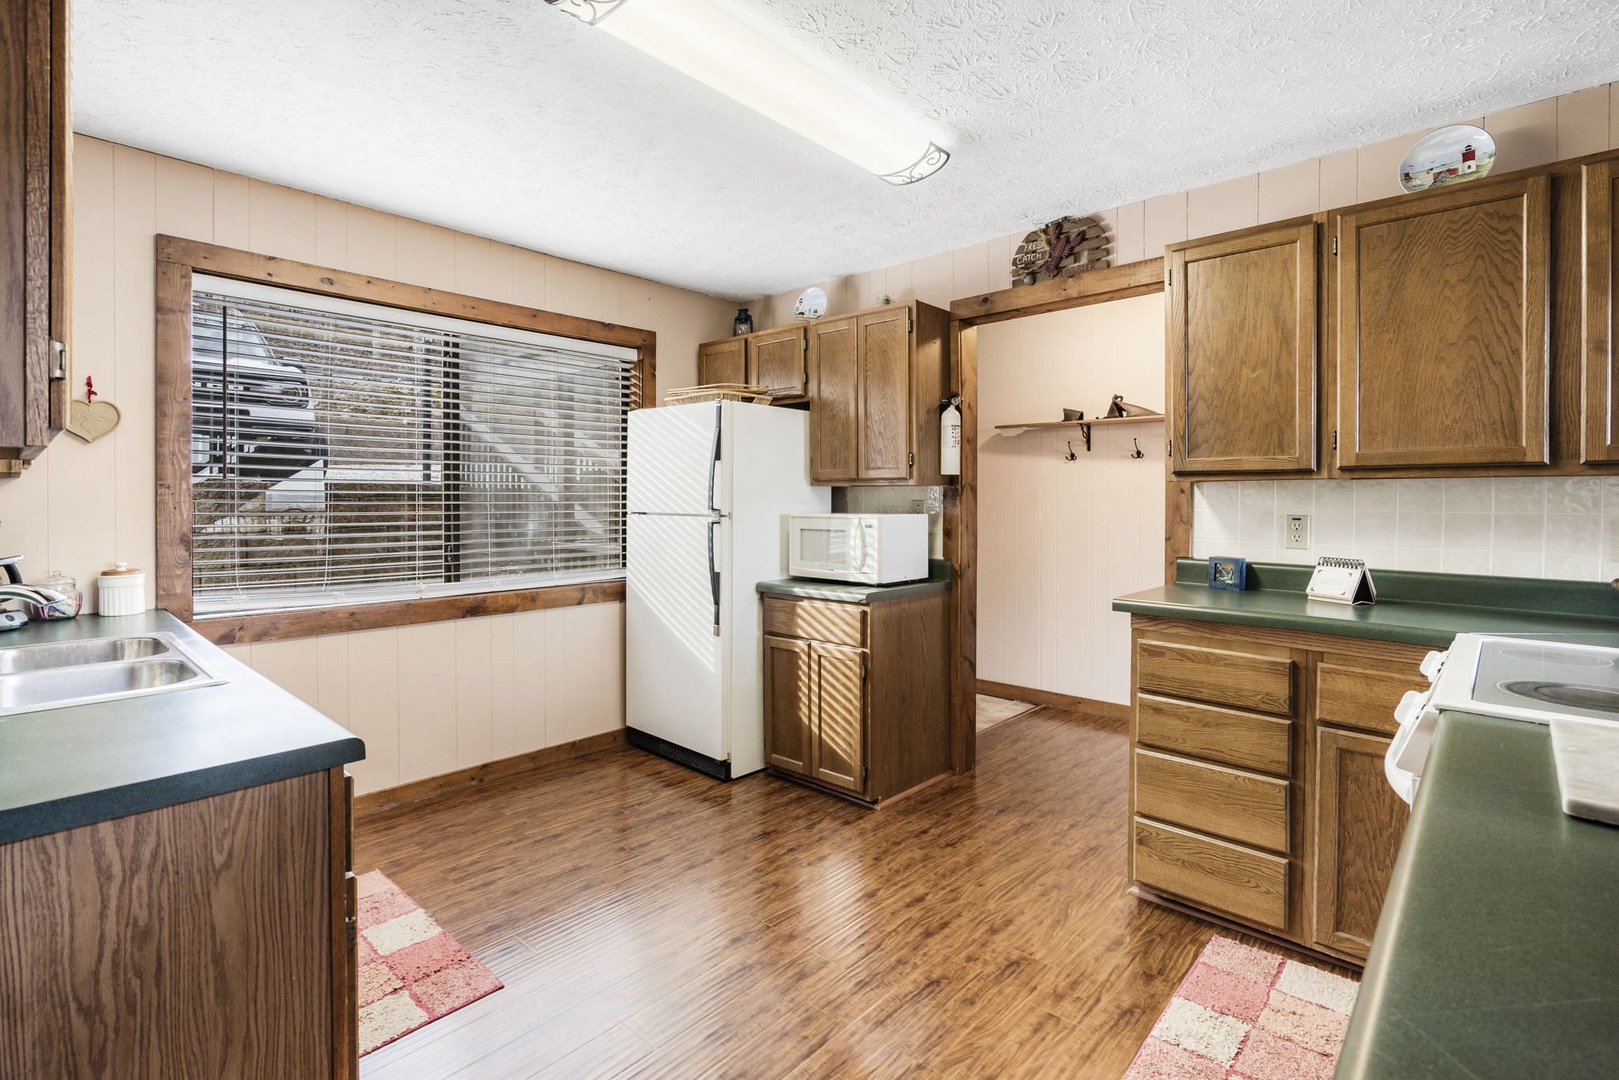 Unit 116 - Fully equipped kitchen